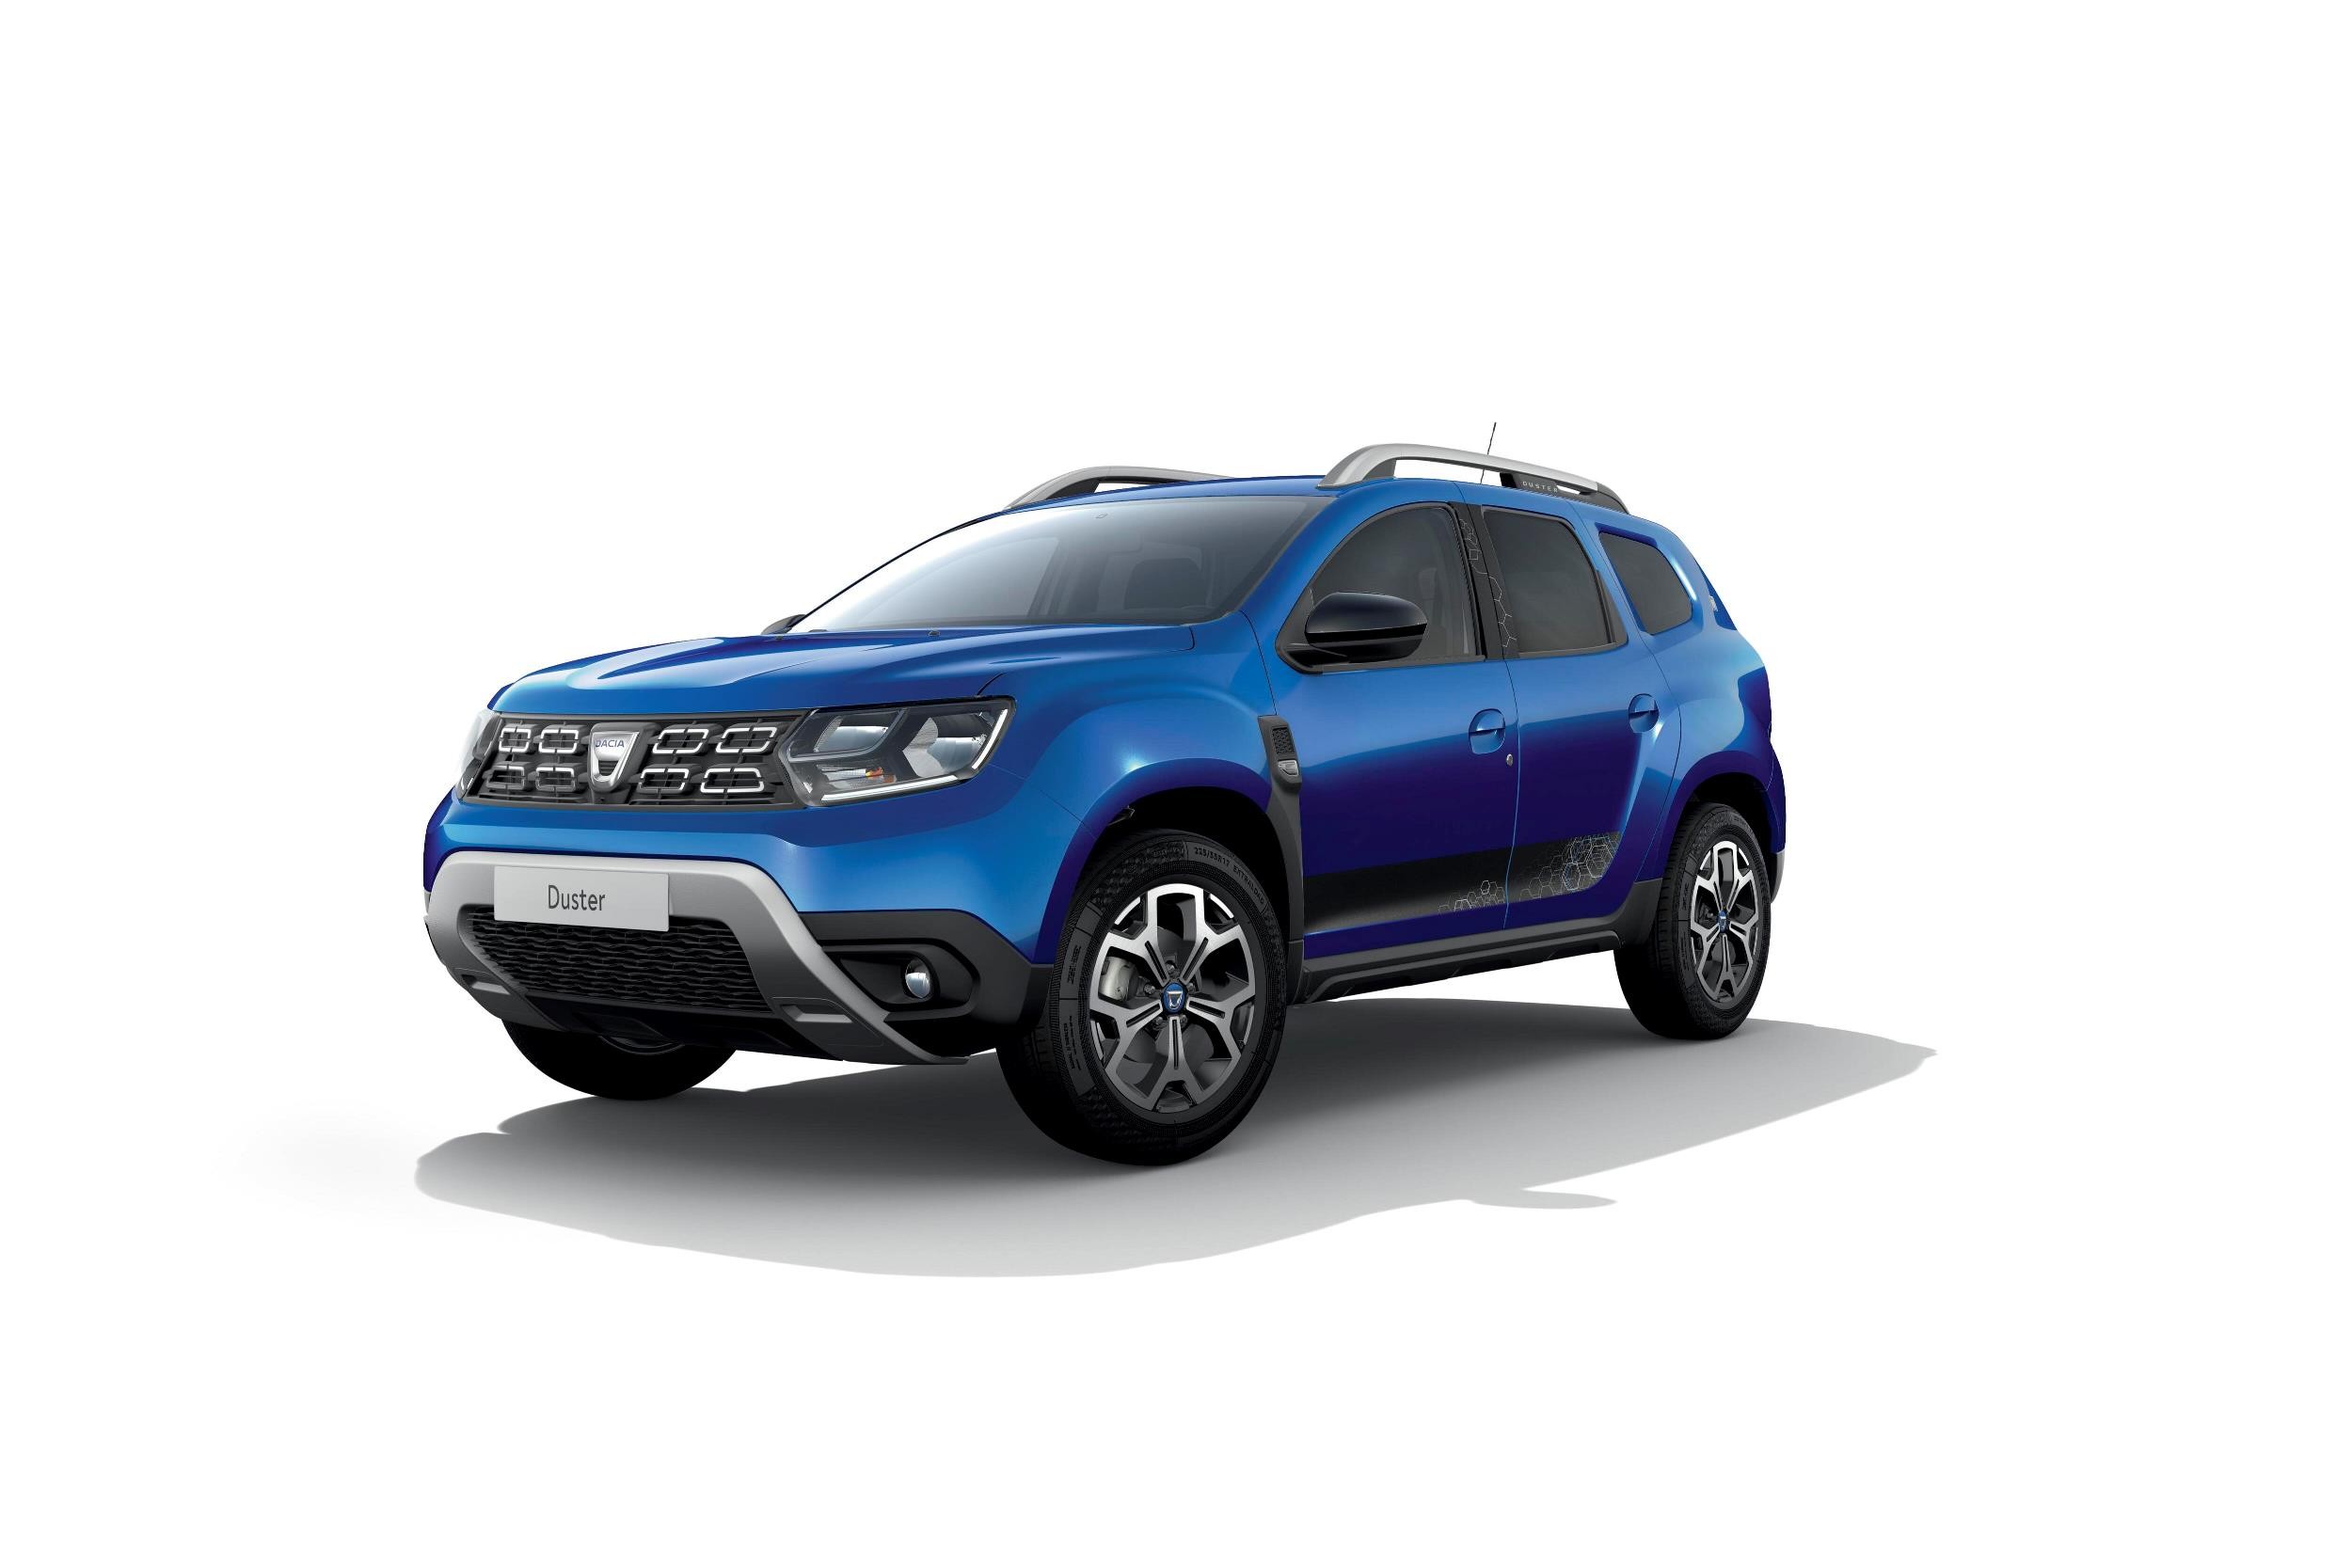 2022 Dacia Duster Facelift Will Debut on June 22nd With 8 0 inch Touchscreen autoevolution